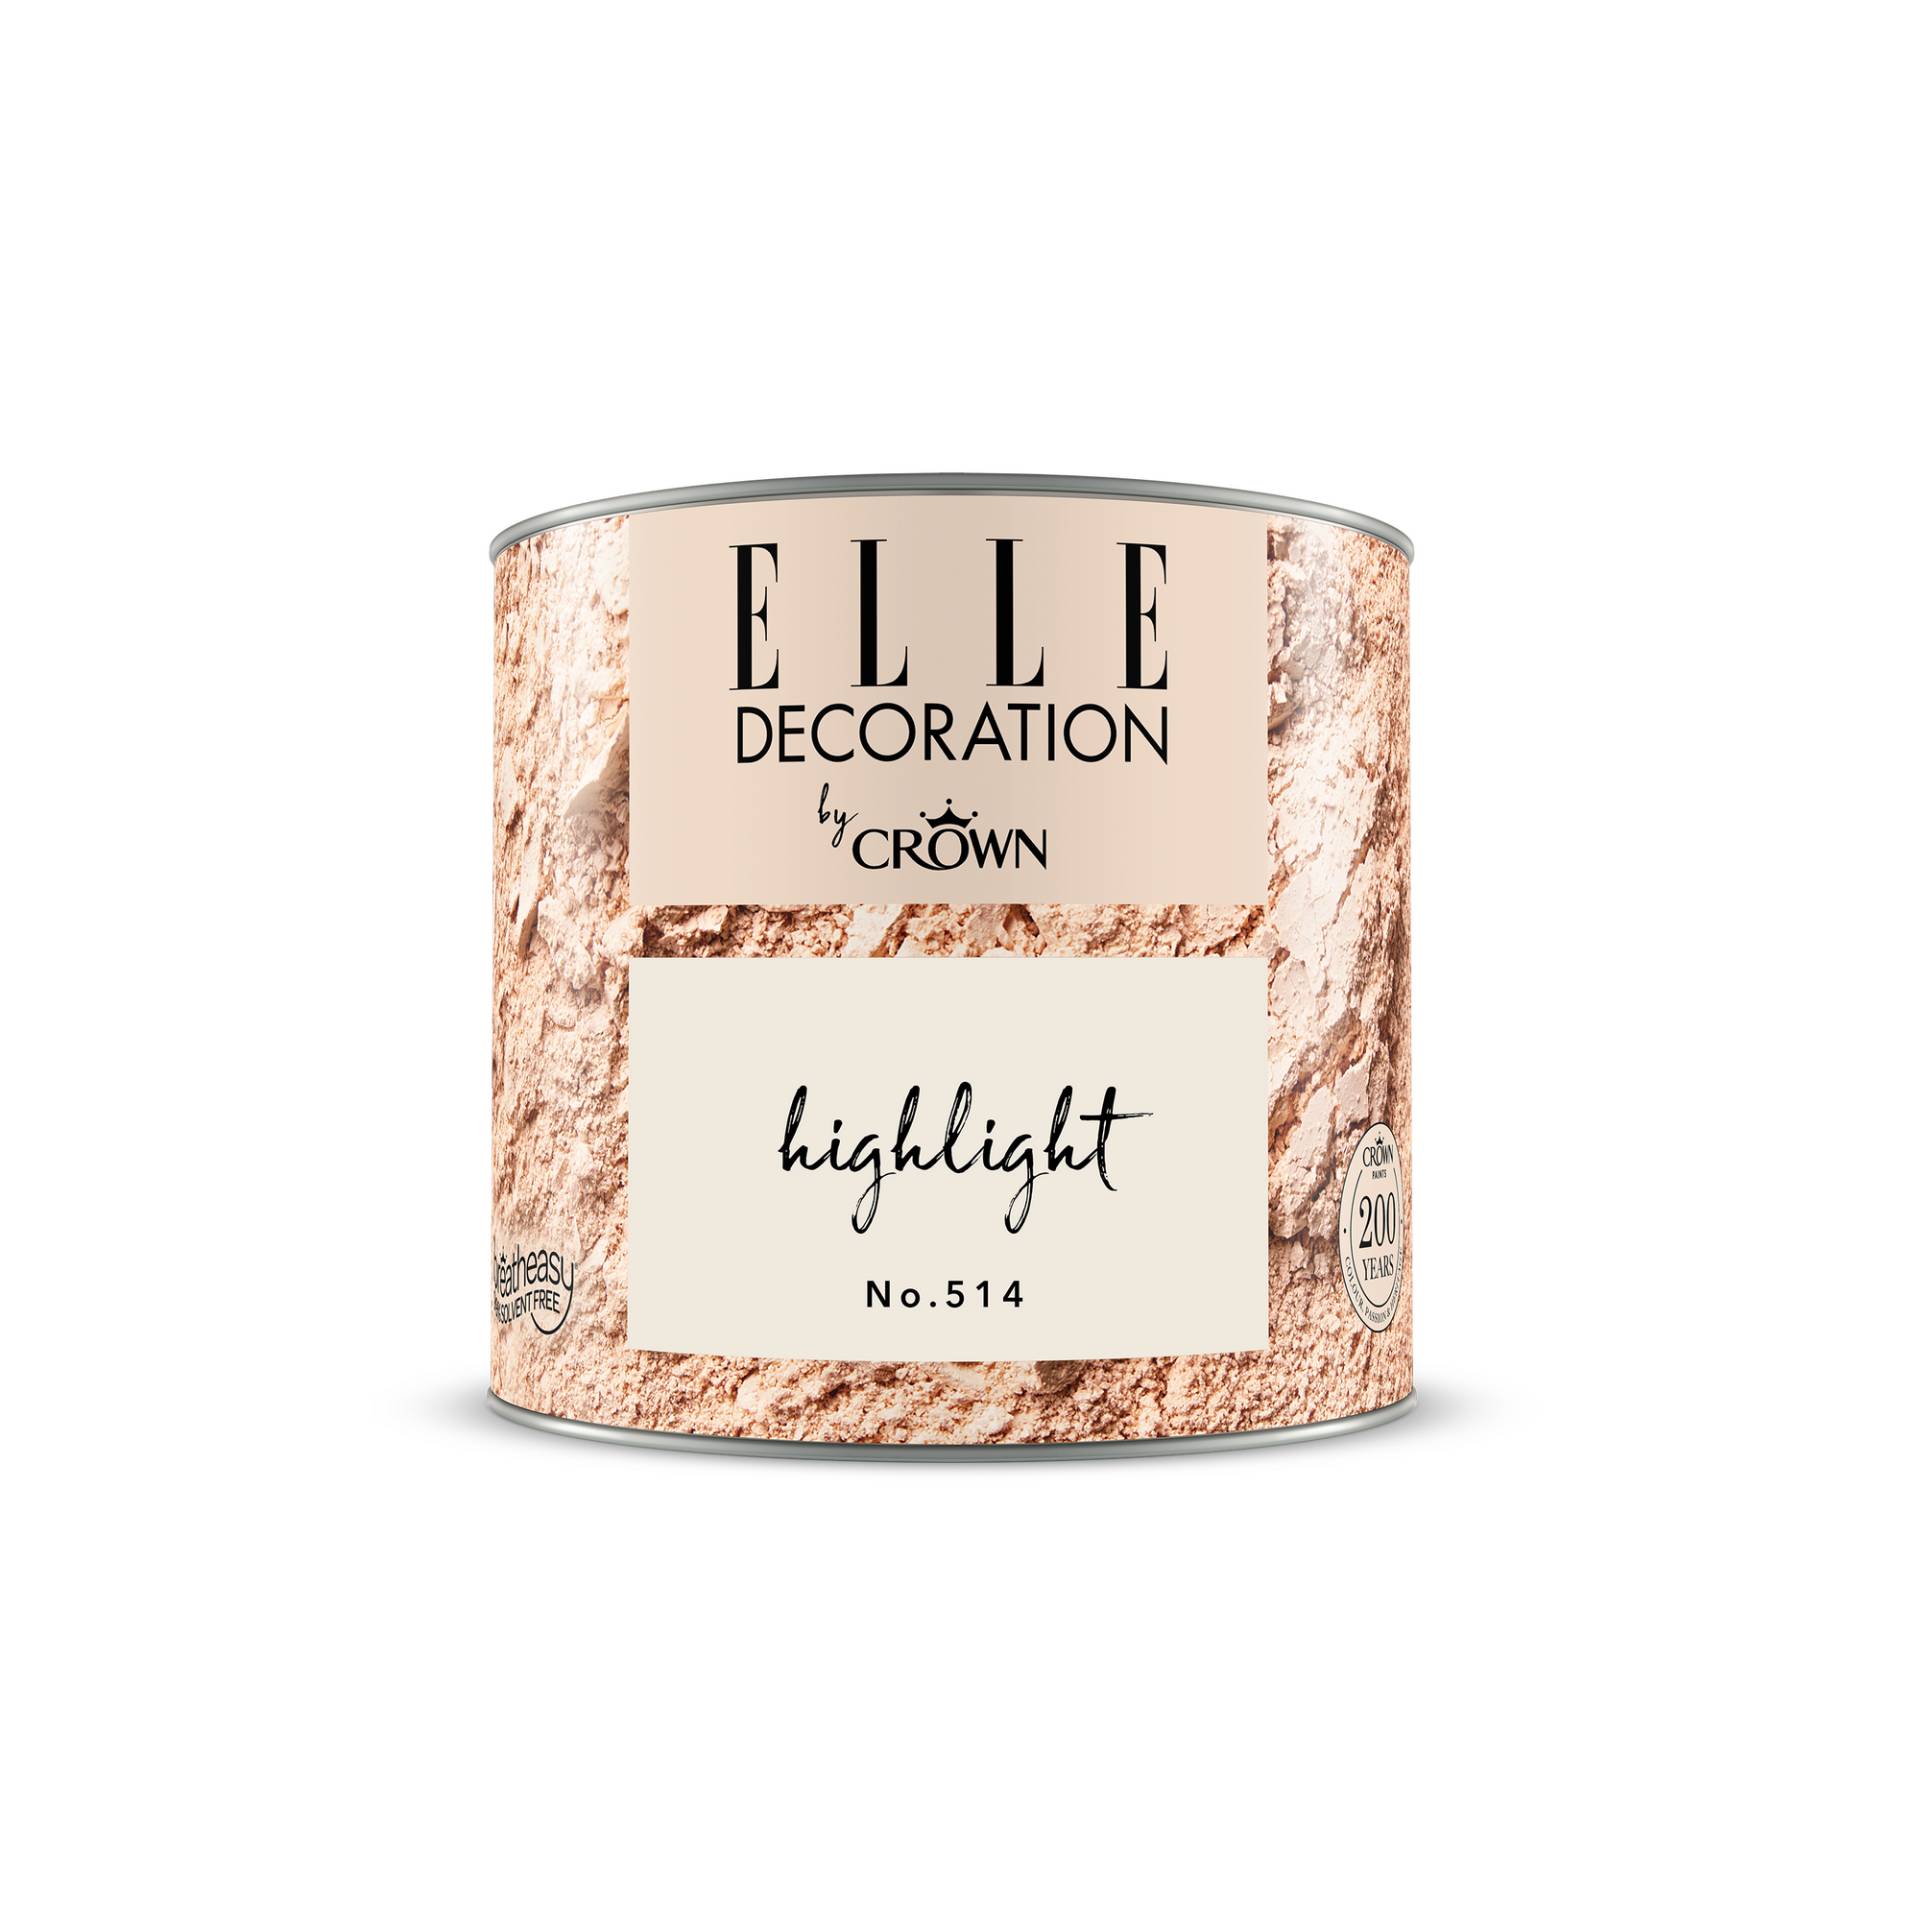 ELLE Decoration by Crown Wandfarbe 'Highlight No. 514' beige matt 125 ml von ELLE Decoration by Crown